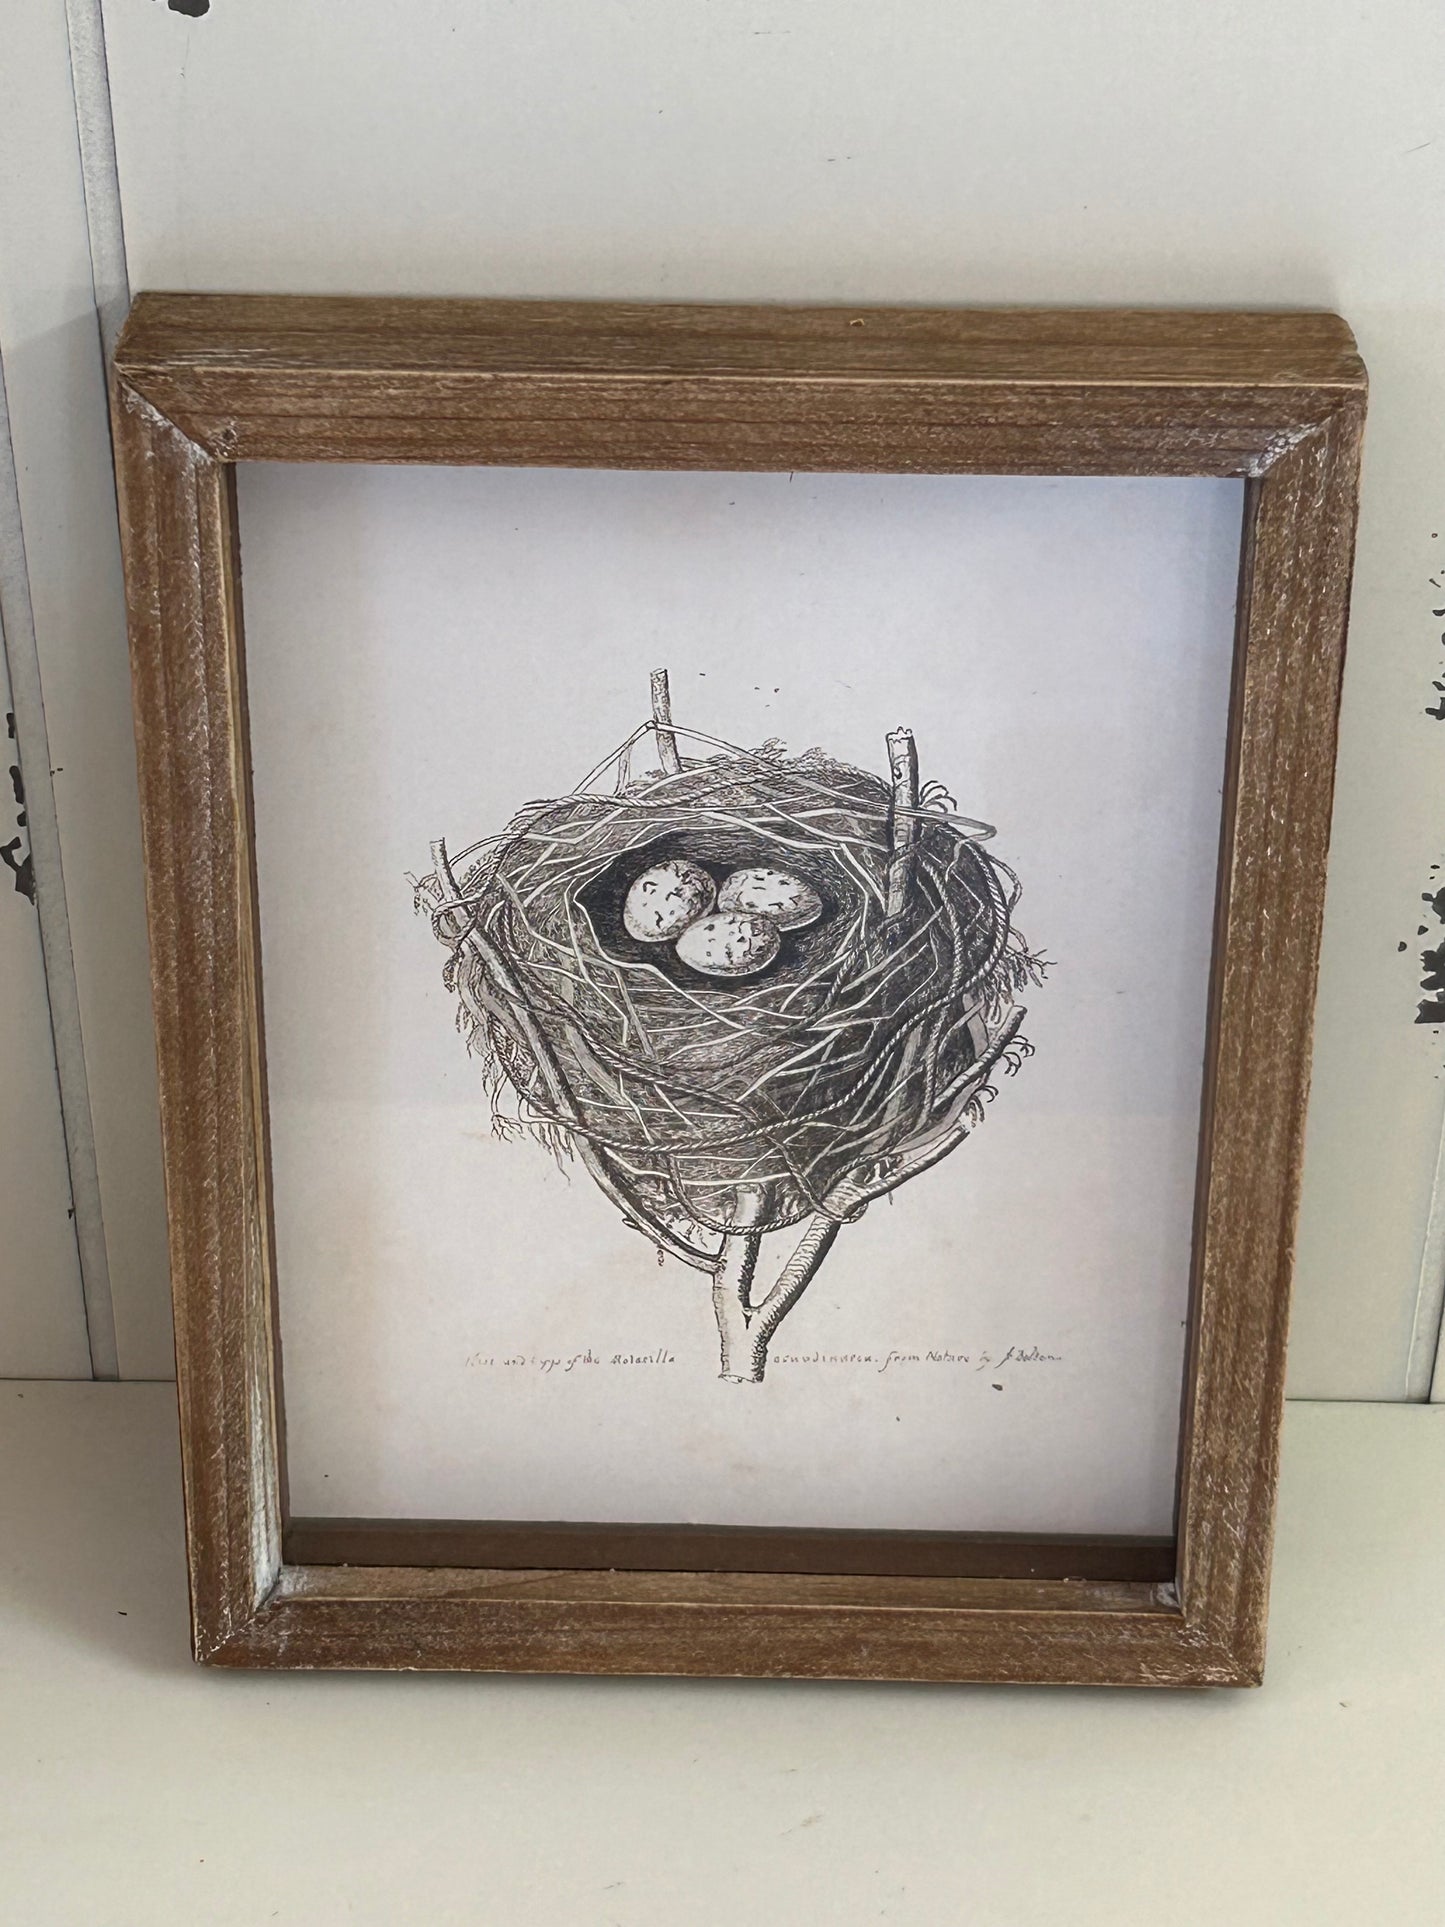 Wooden Picture with European Birds Nest